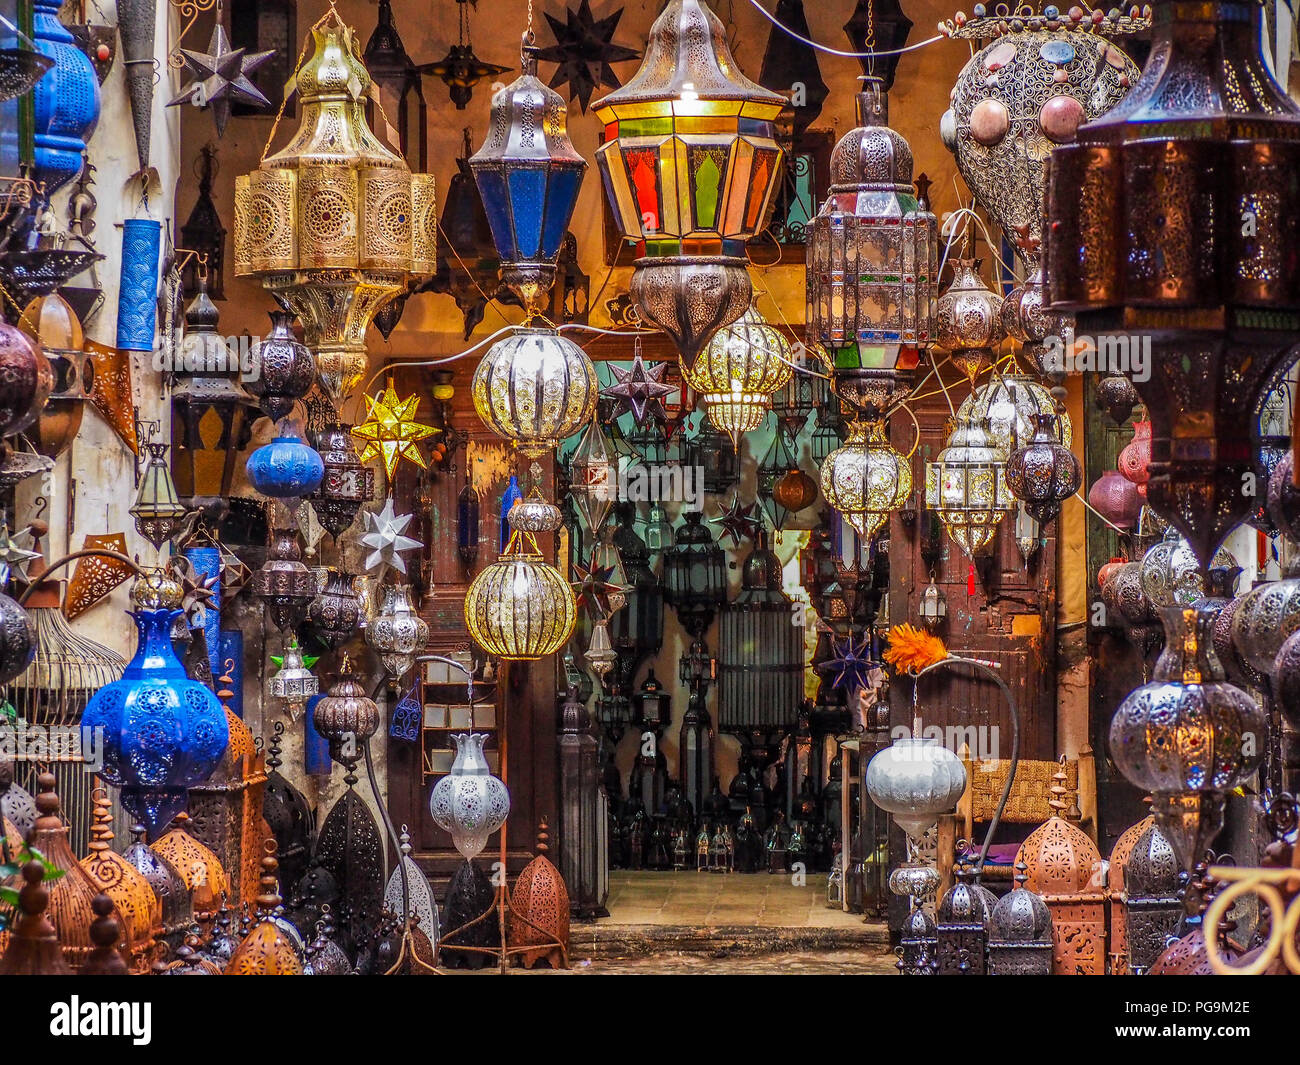 Moroccan style in a shop in souks in Medina Marrakech Stock Photo - Alamy